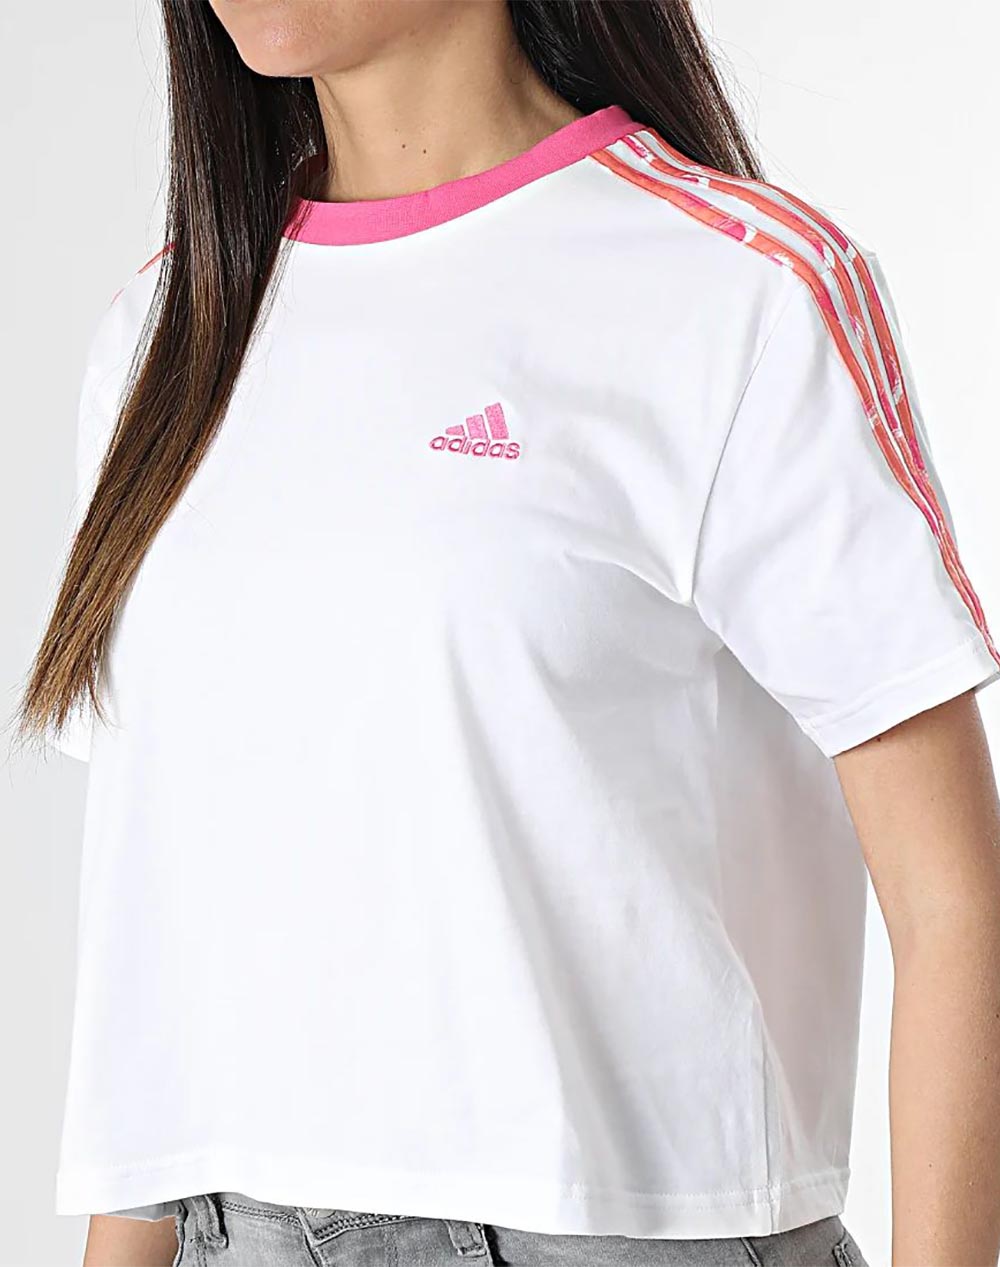 ADIDAS TOP W 3S CR TOP - White